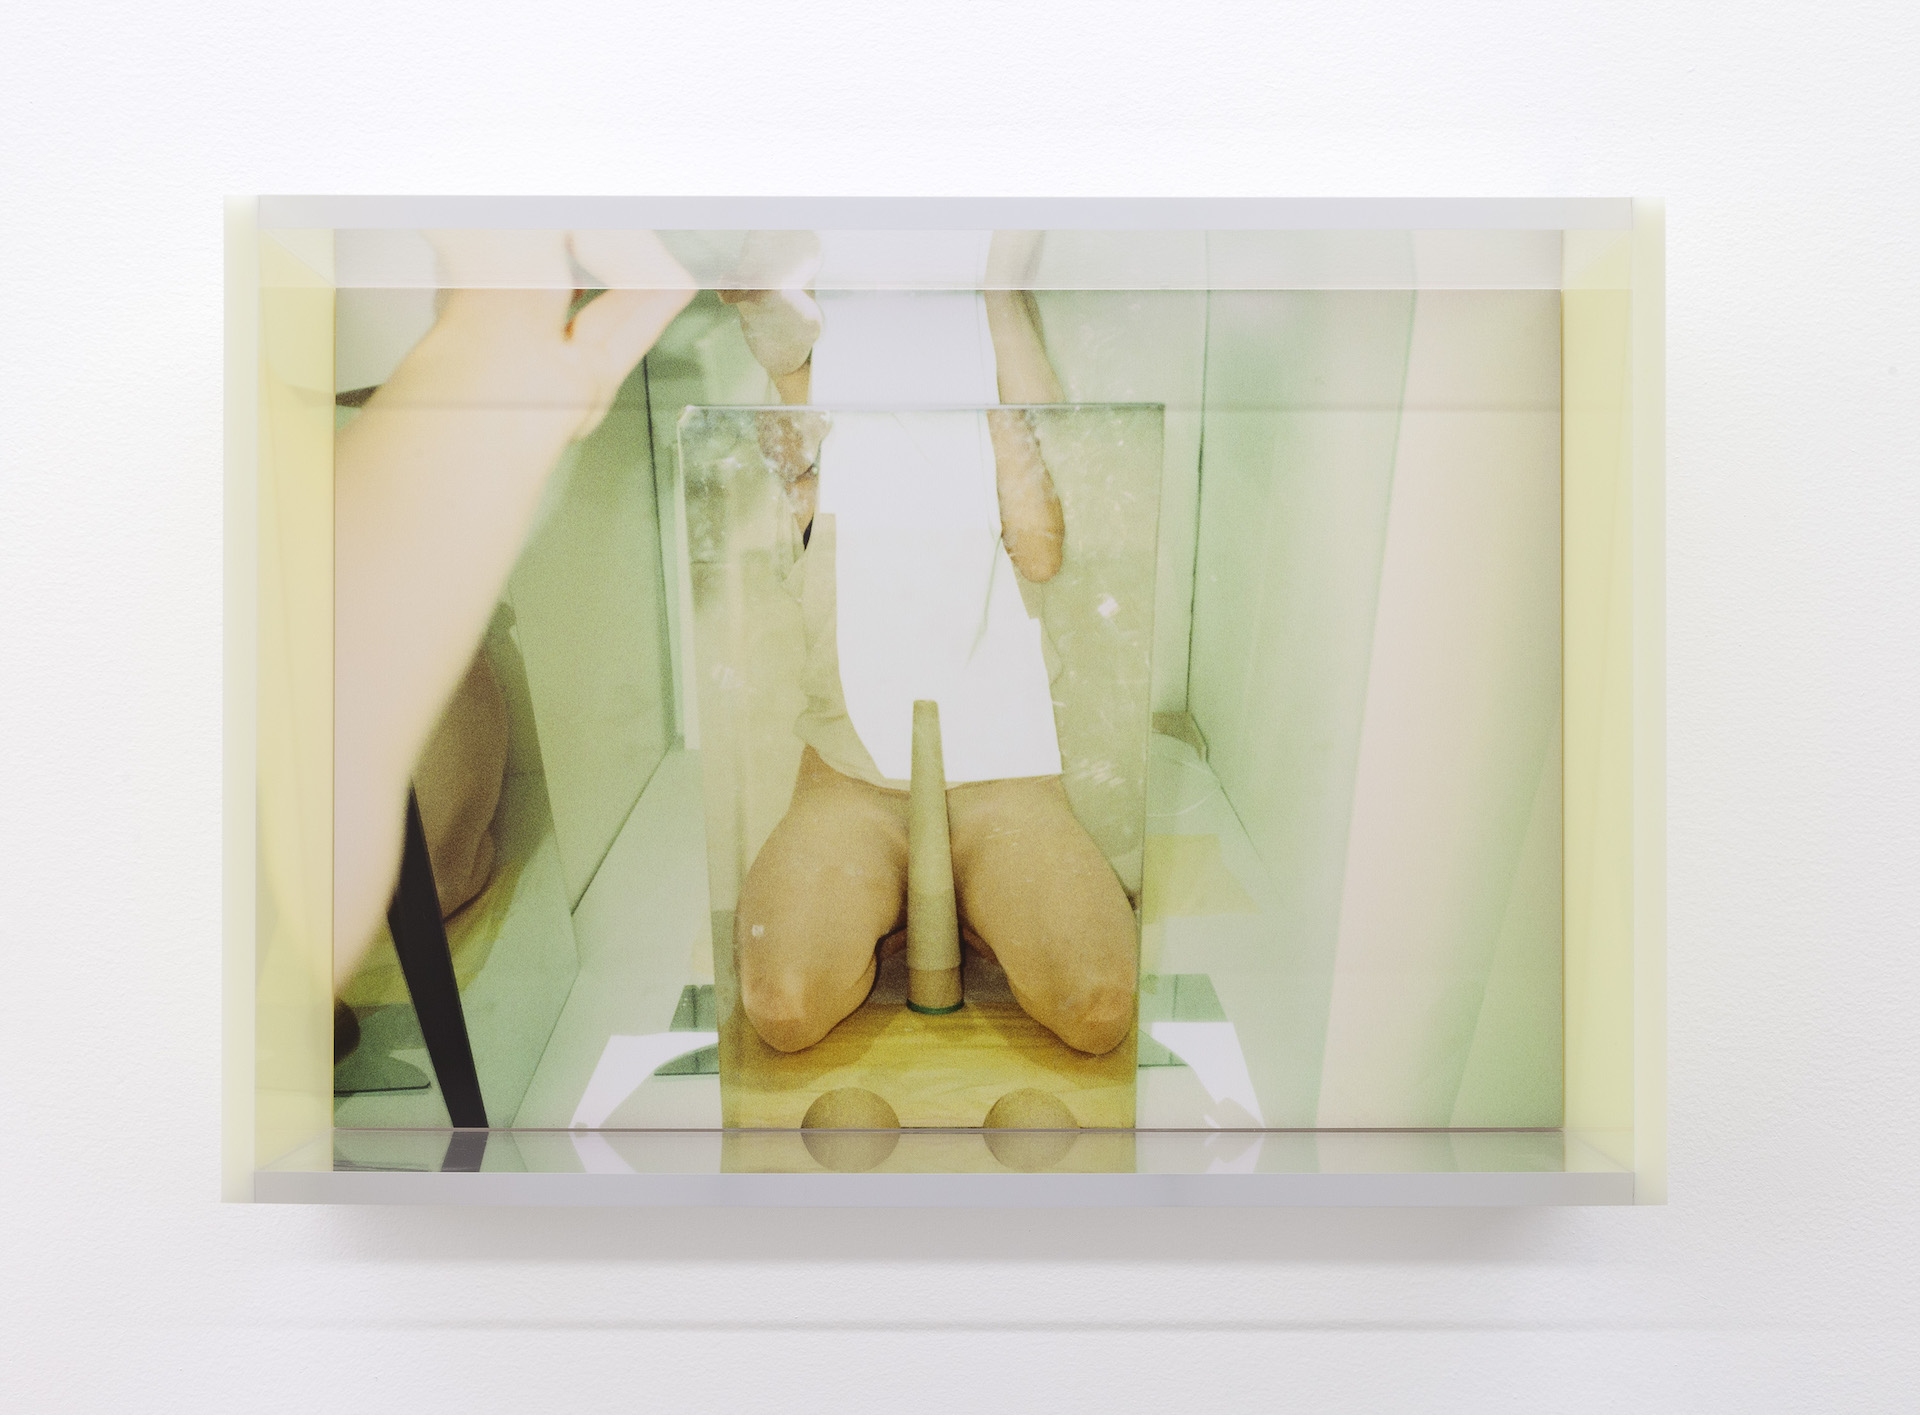 A Mirrored Detritus and the Camouflaged Body : B. Ingrid Olson at i8 Gallery